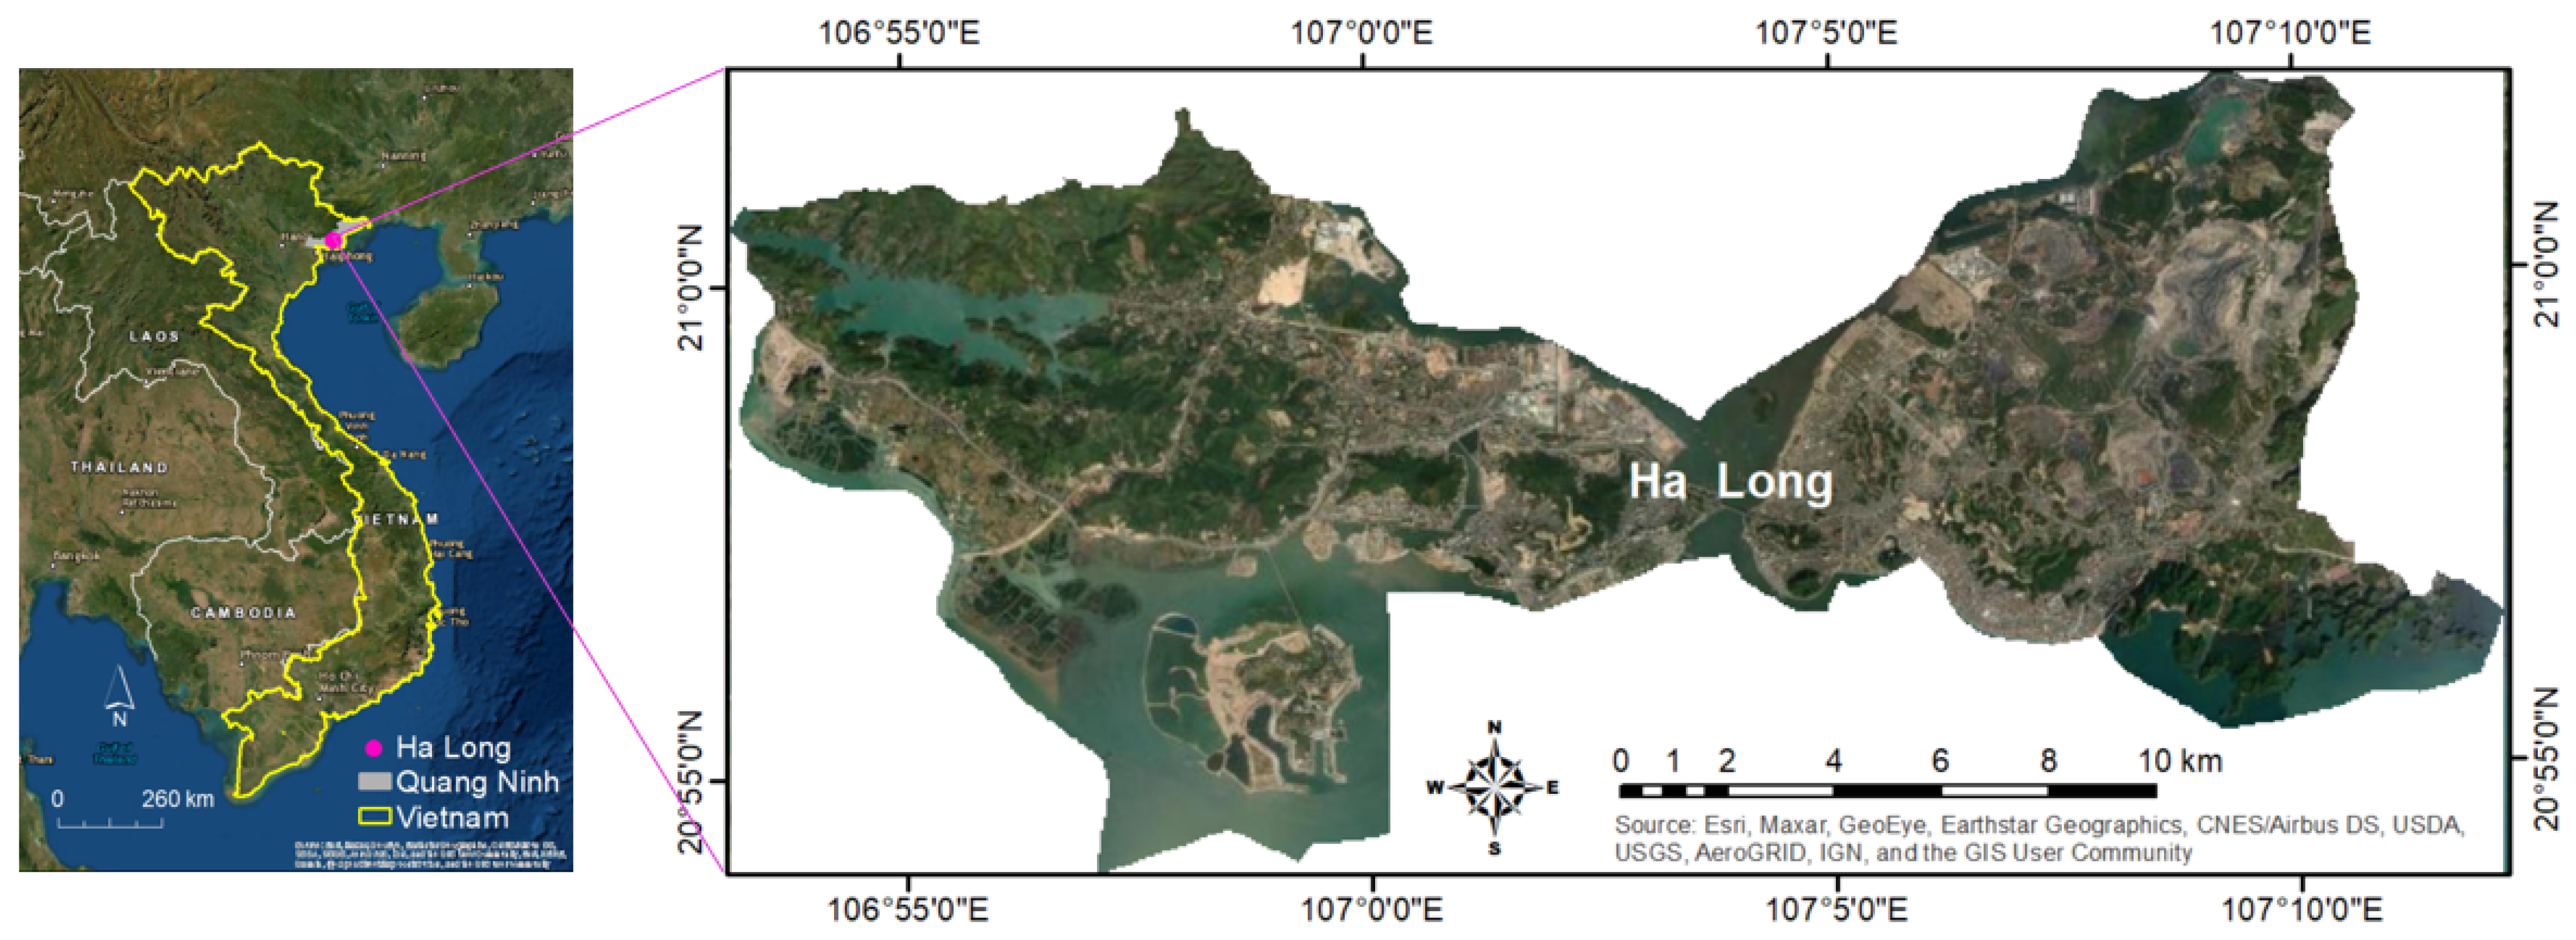 Sustainability | Free Full-Text | Estimation of Urban Land-Use Efficiency  for Sustainable Development by Integrating over 30-Year Landsat Imagery  with Population Data: A Case Study of Ha Long, Vietnam